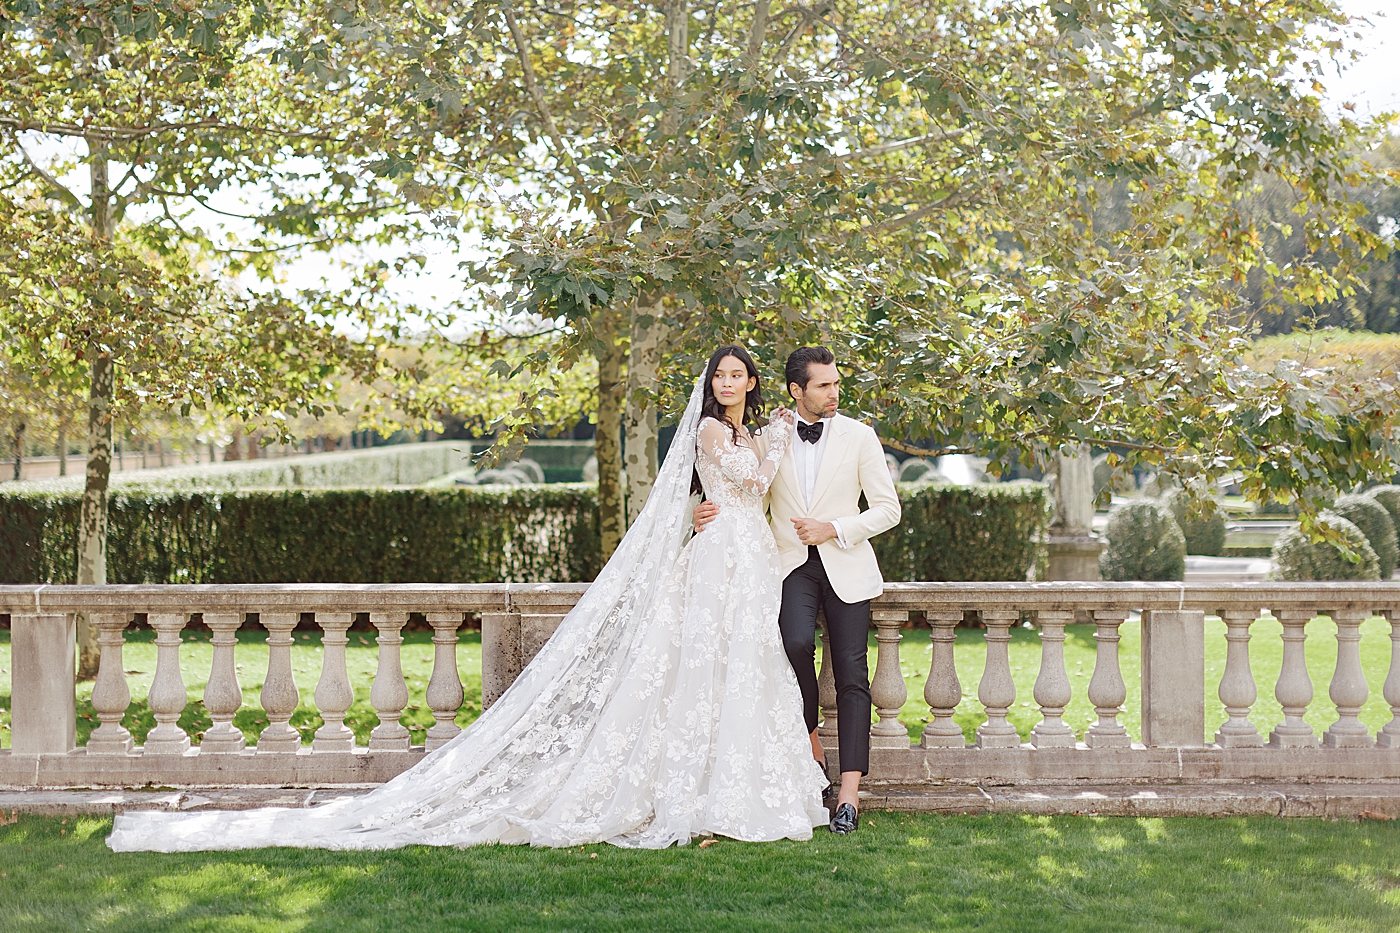 Portrait of bride and groom in the garden during Oheka castle wedding | Image by Hope Helmuth Photography